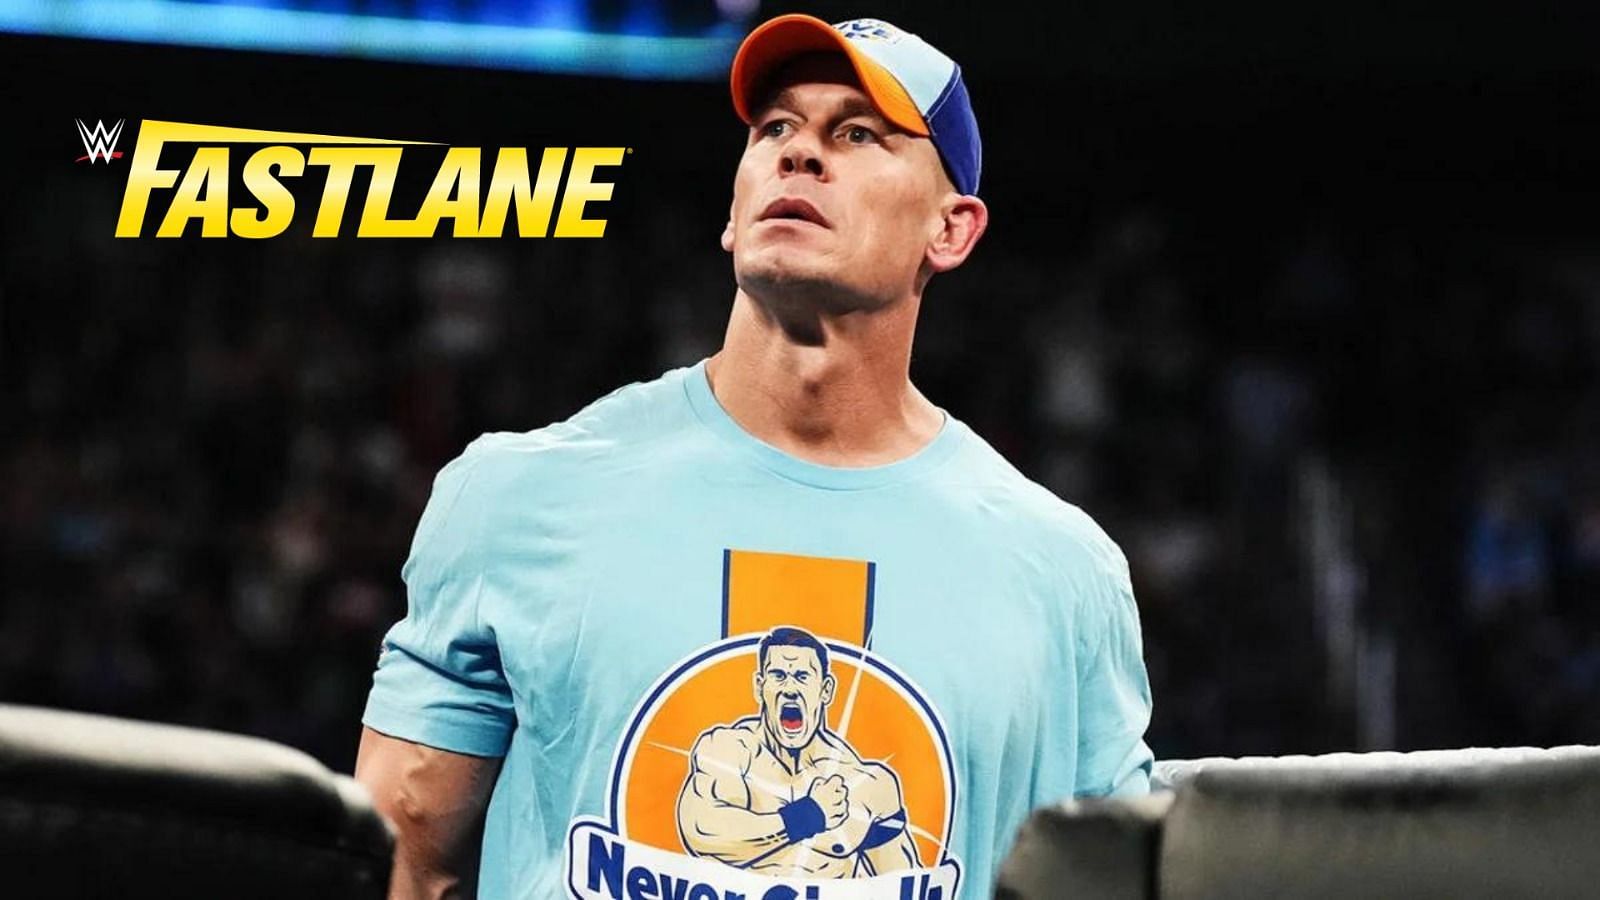 John Cena is one of the most popular wrestlers in WWE